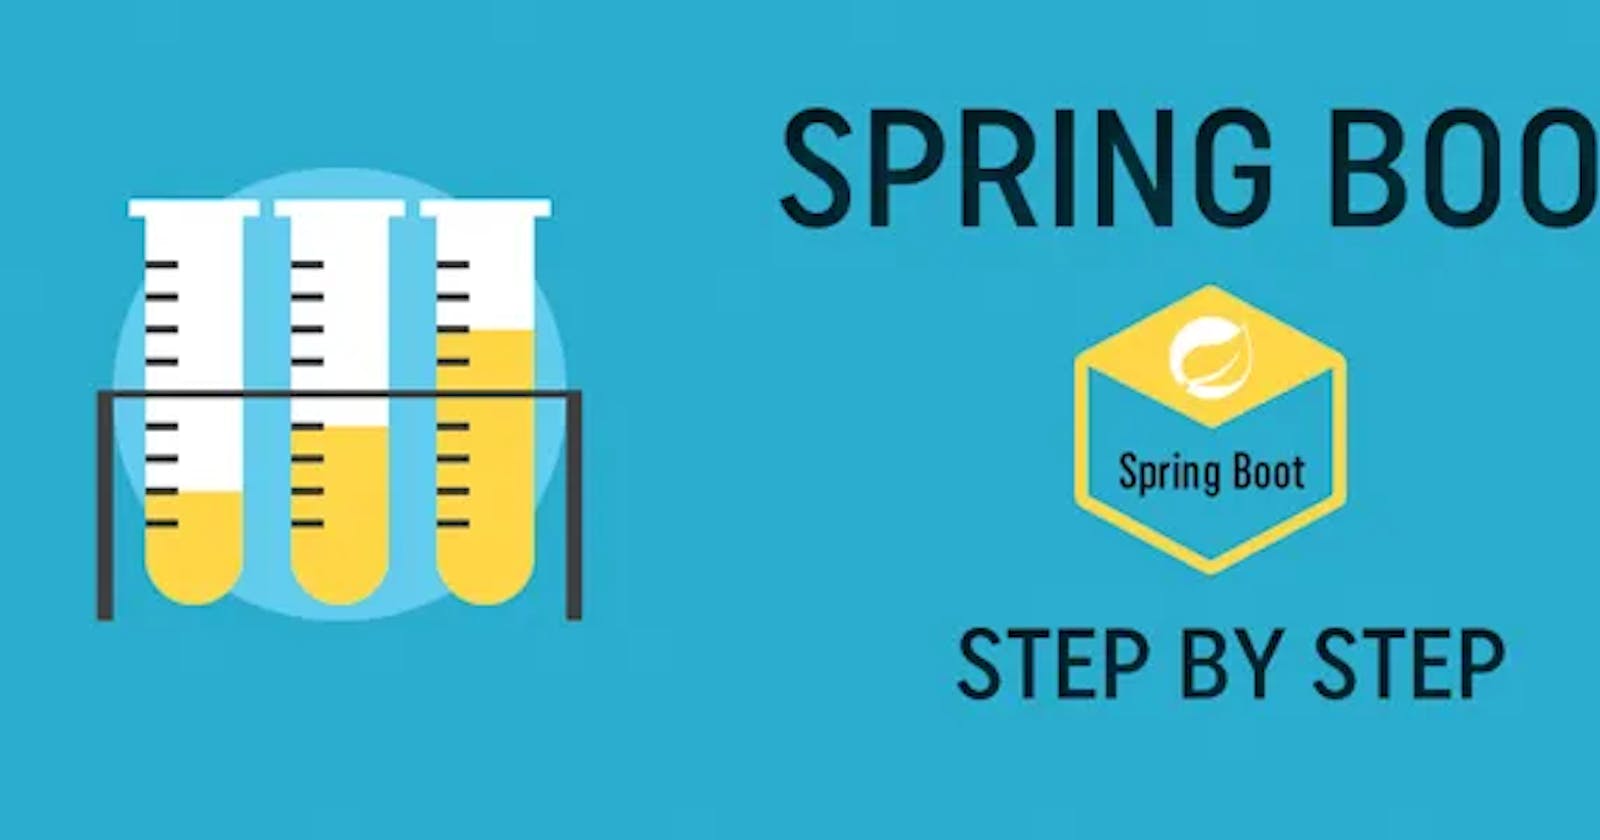 Exploring the Different Methods for Creating a Spring Boot Application